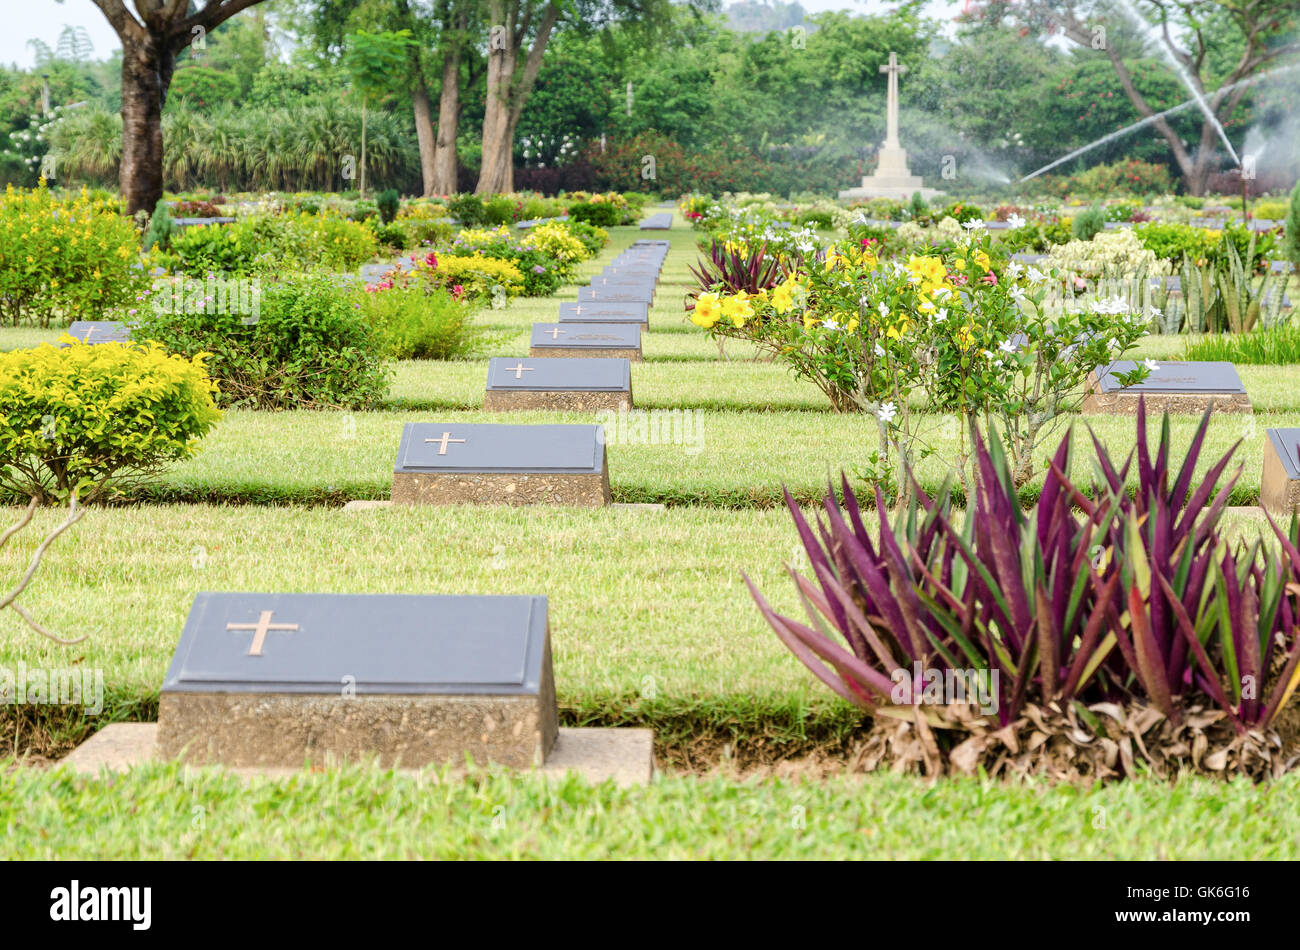 Chungkai War Cemetery this is historical monuments where to respect prisoners of the World War 2 who rest in peace here, Kanchan Stock Photo